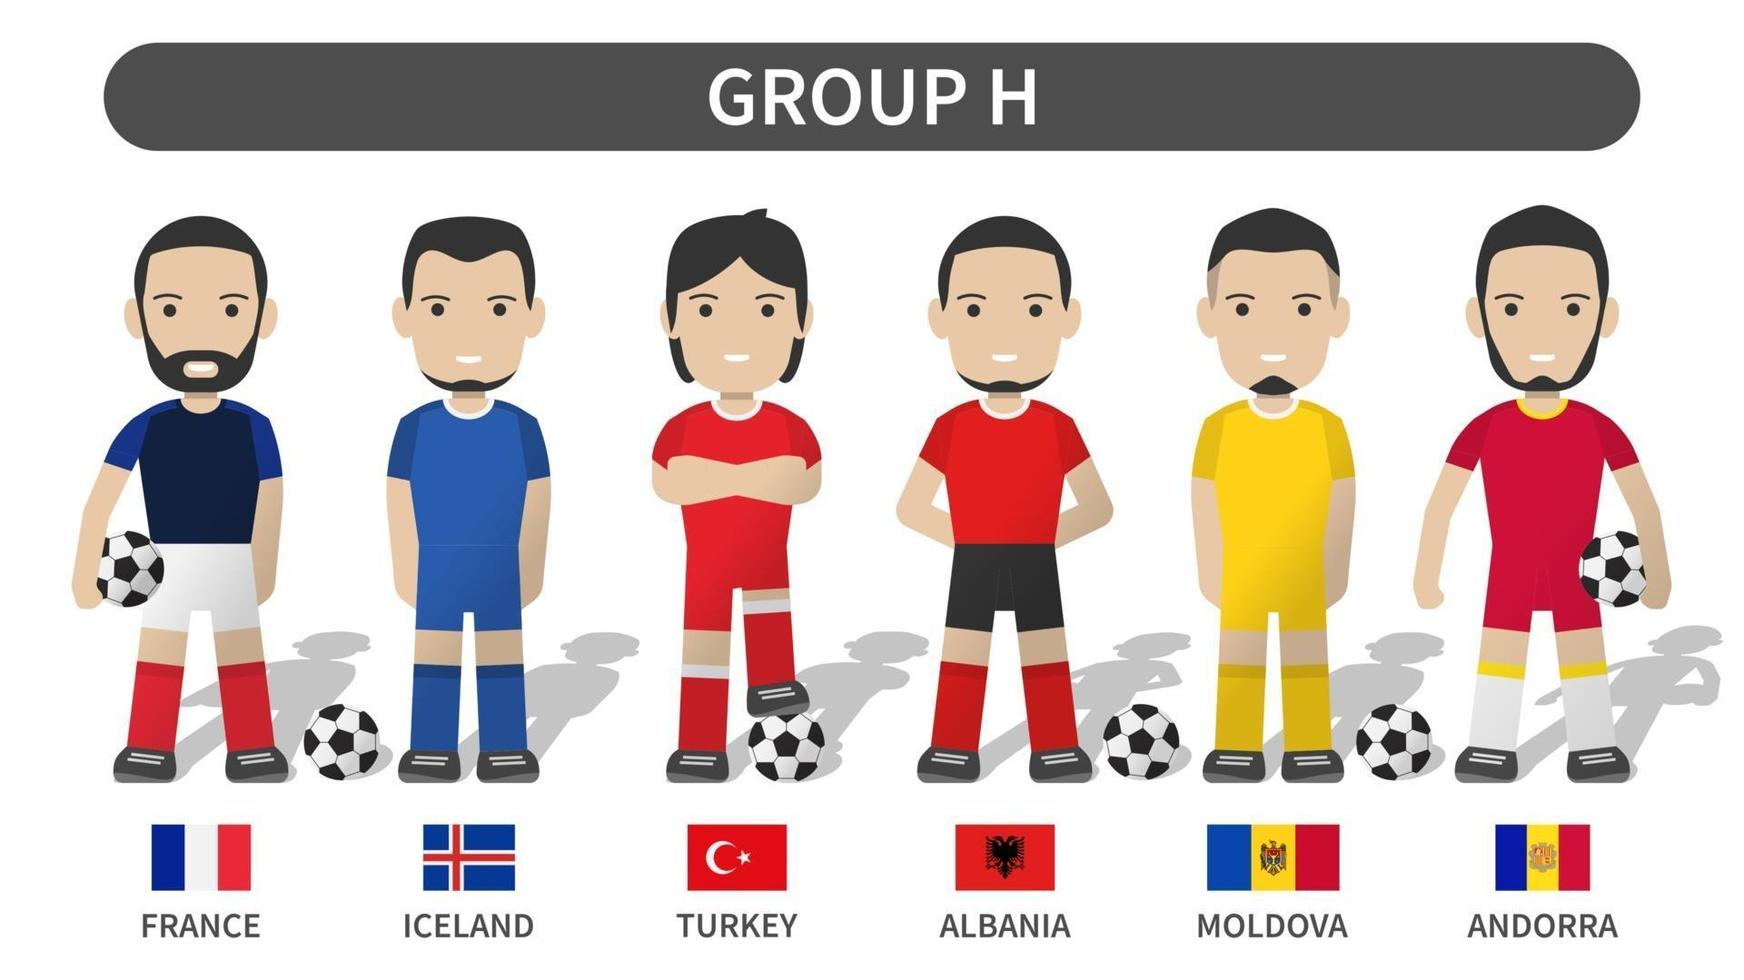 European soccer cup tournament qualifying draws 2020 and 2021 . Group H . Football player with jersey kit uniform and national flag . Cartoon character flat design . White theme background . Vector .